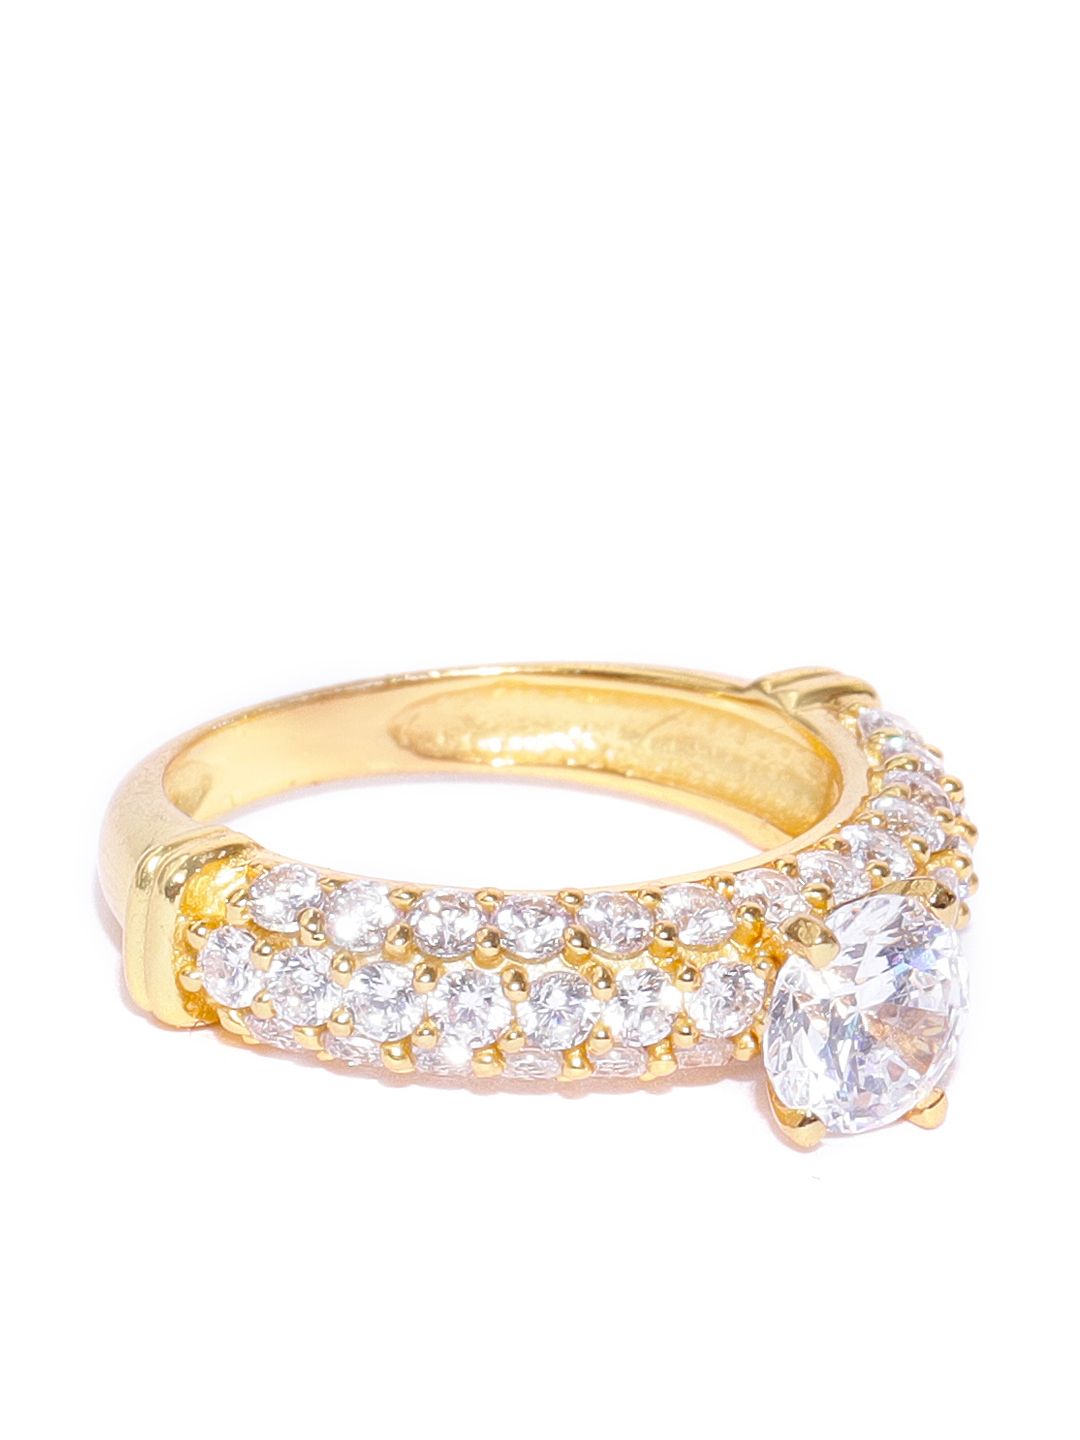 Carlton London Gold-Plated CZ-studded Finger Ring Price in India